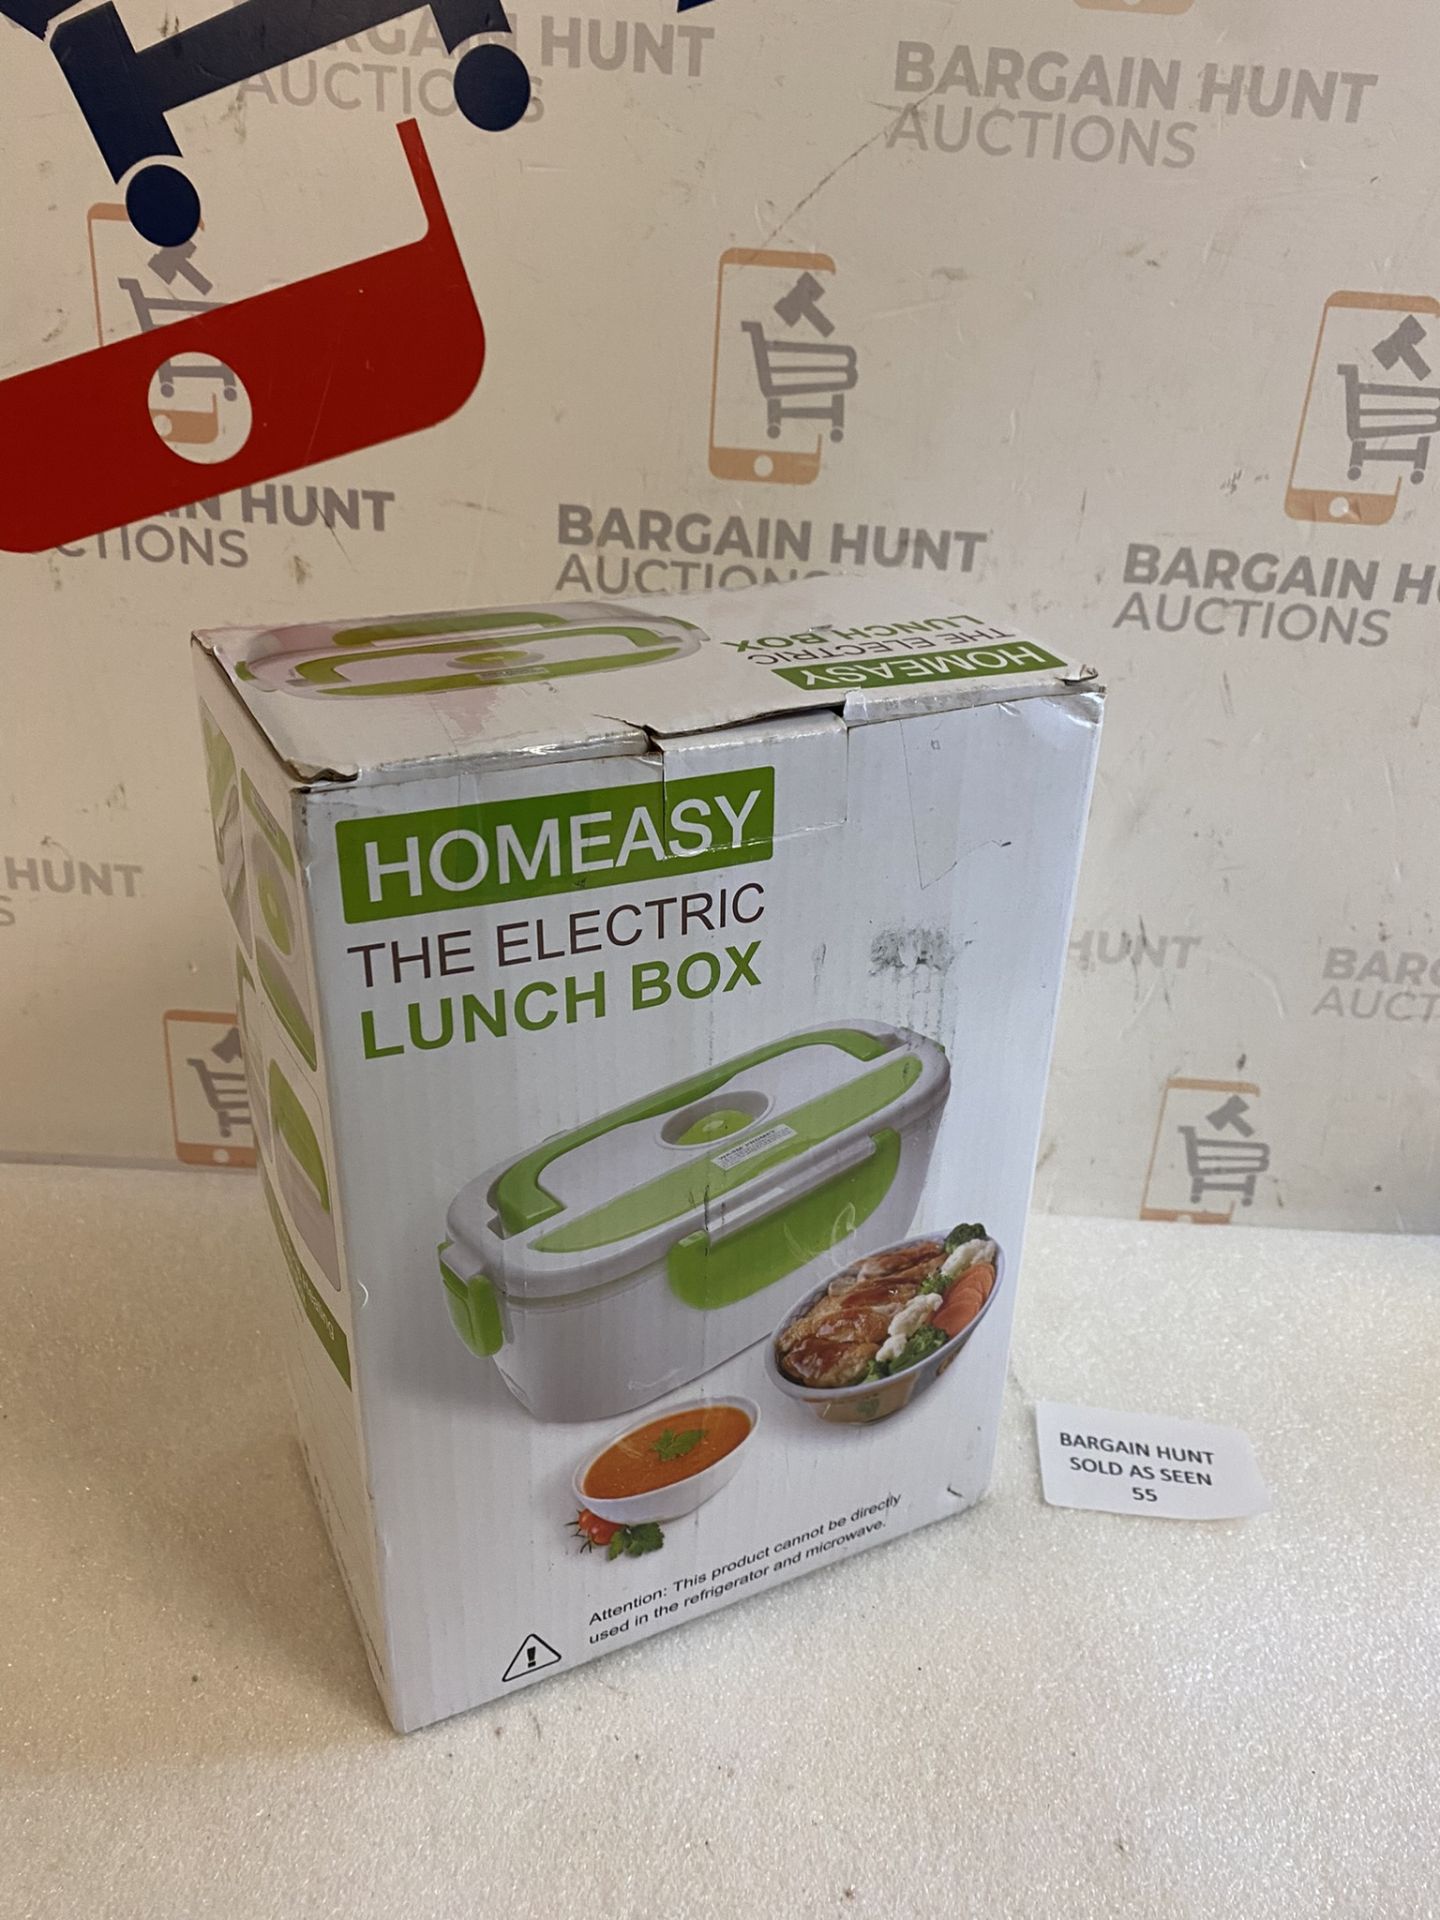 Homeasy Electric Lunch Box 2-in-1 Food Heater Warmer RRP £21.99